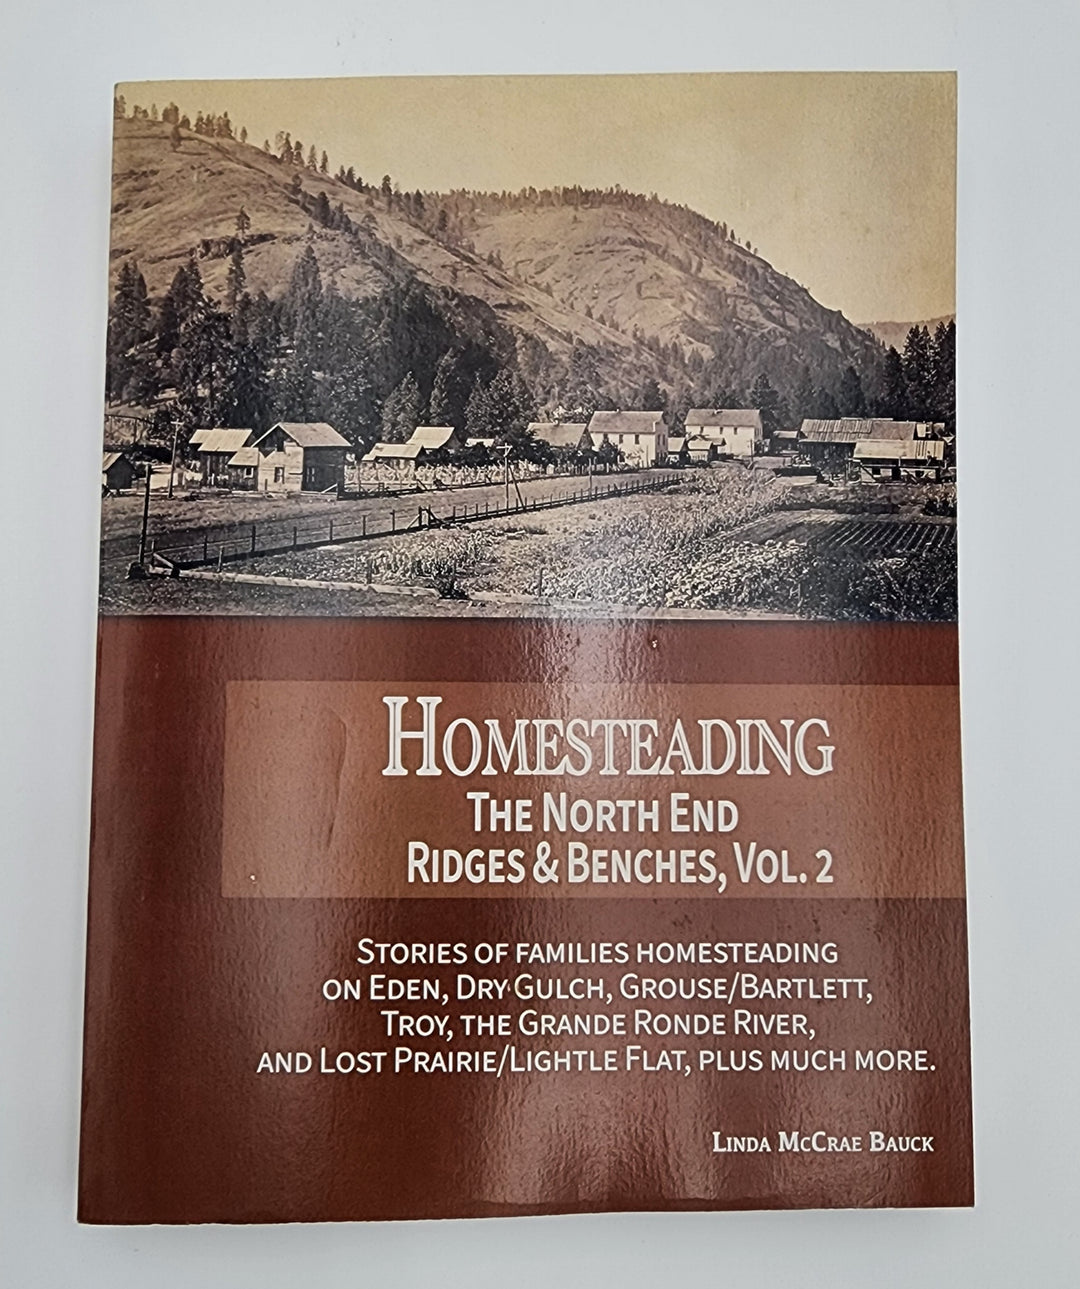 Homesteading The North End Ridges & Benches, Vol. 2